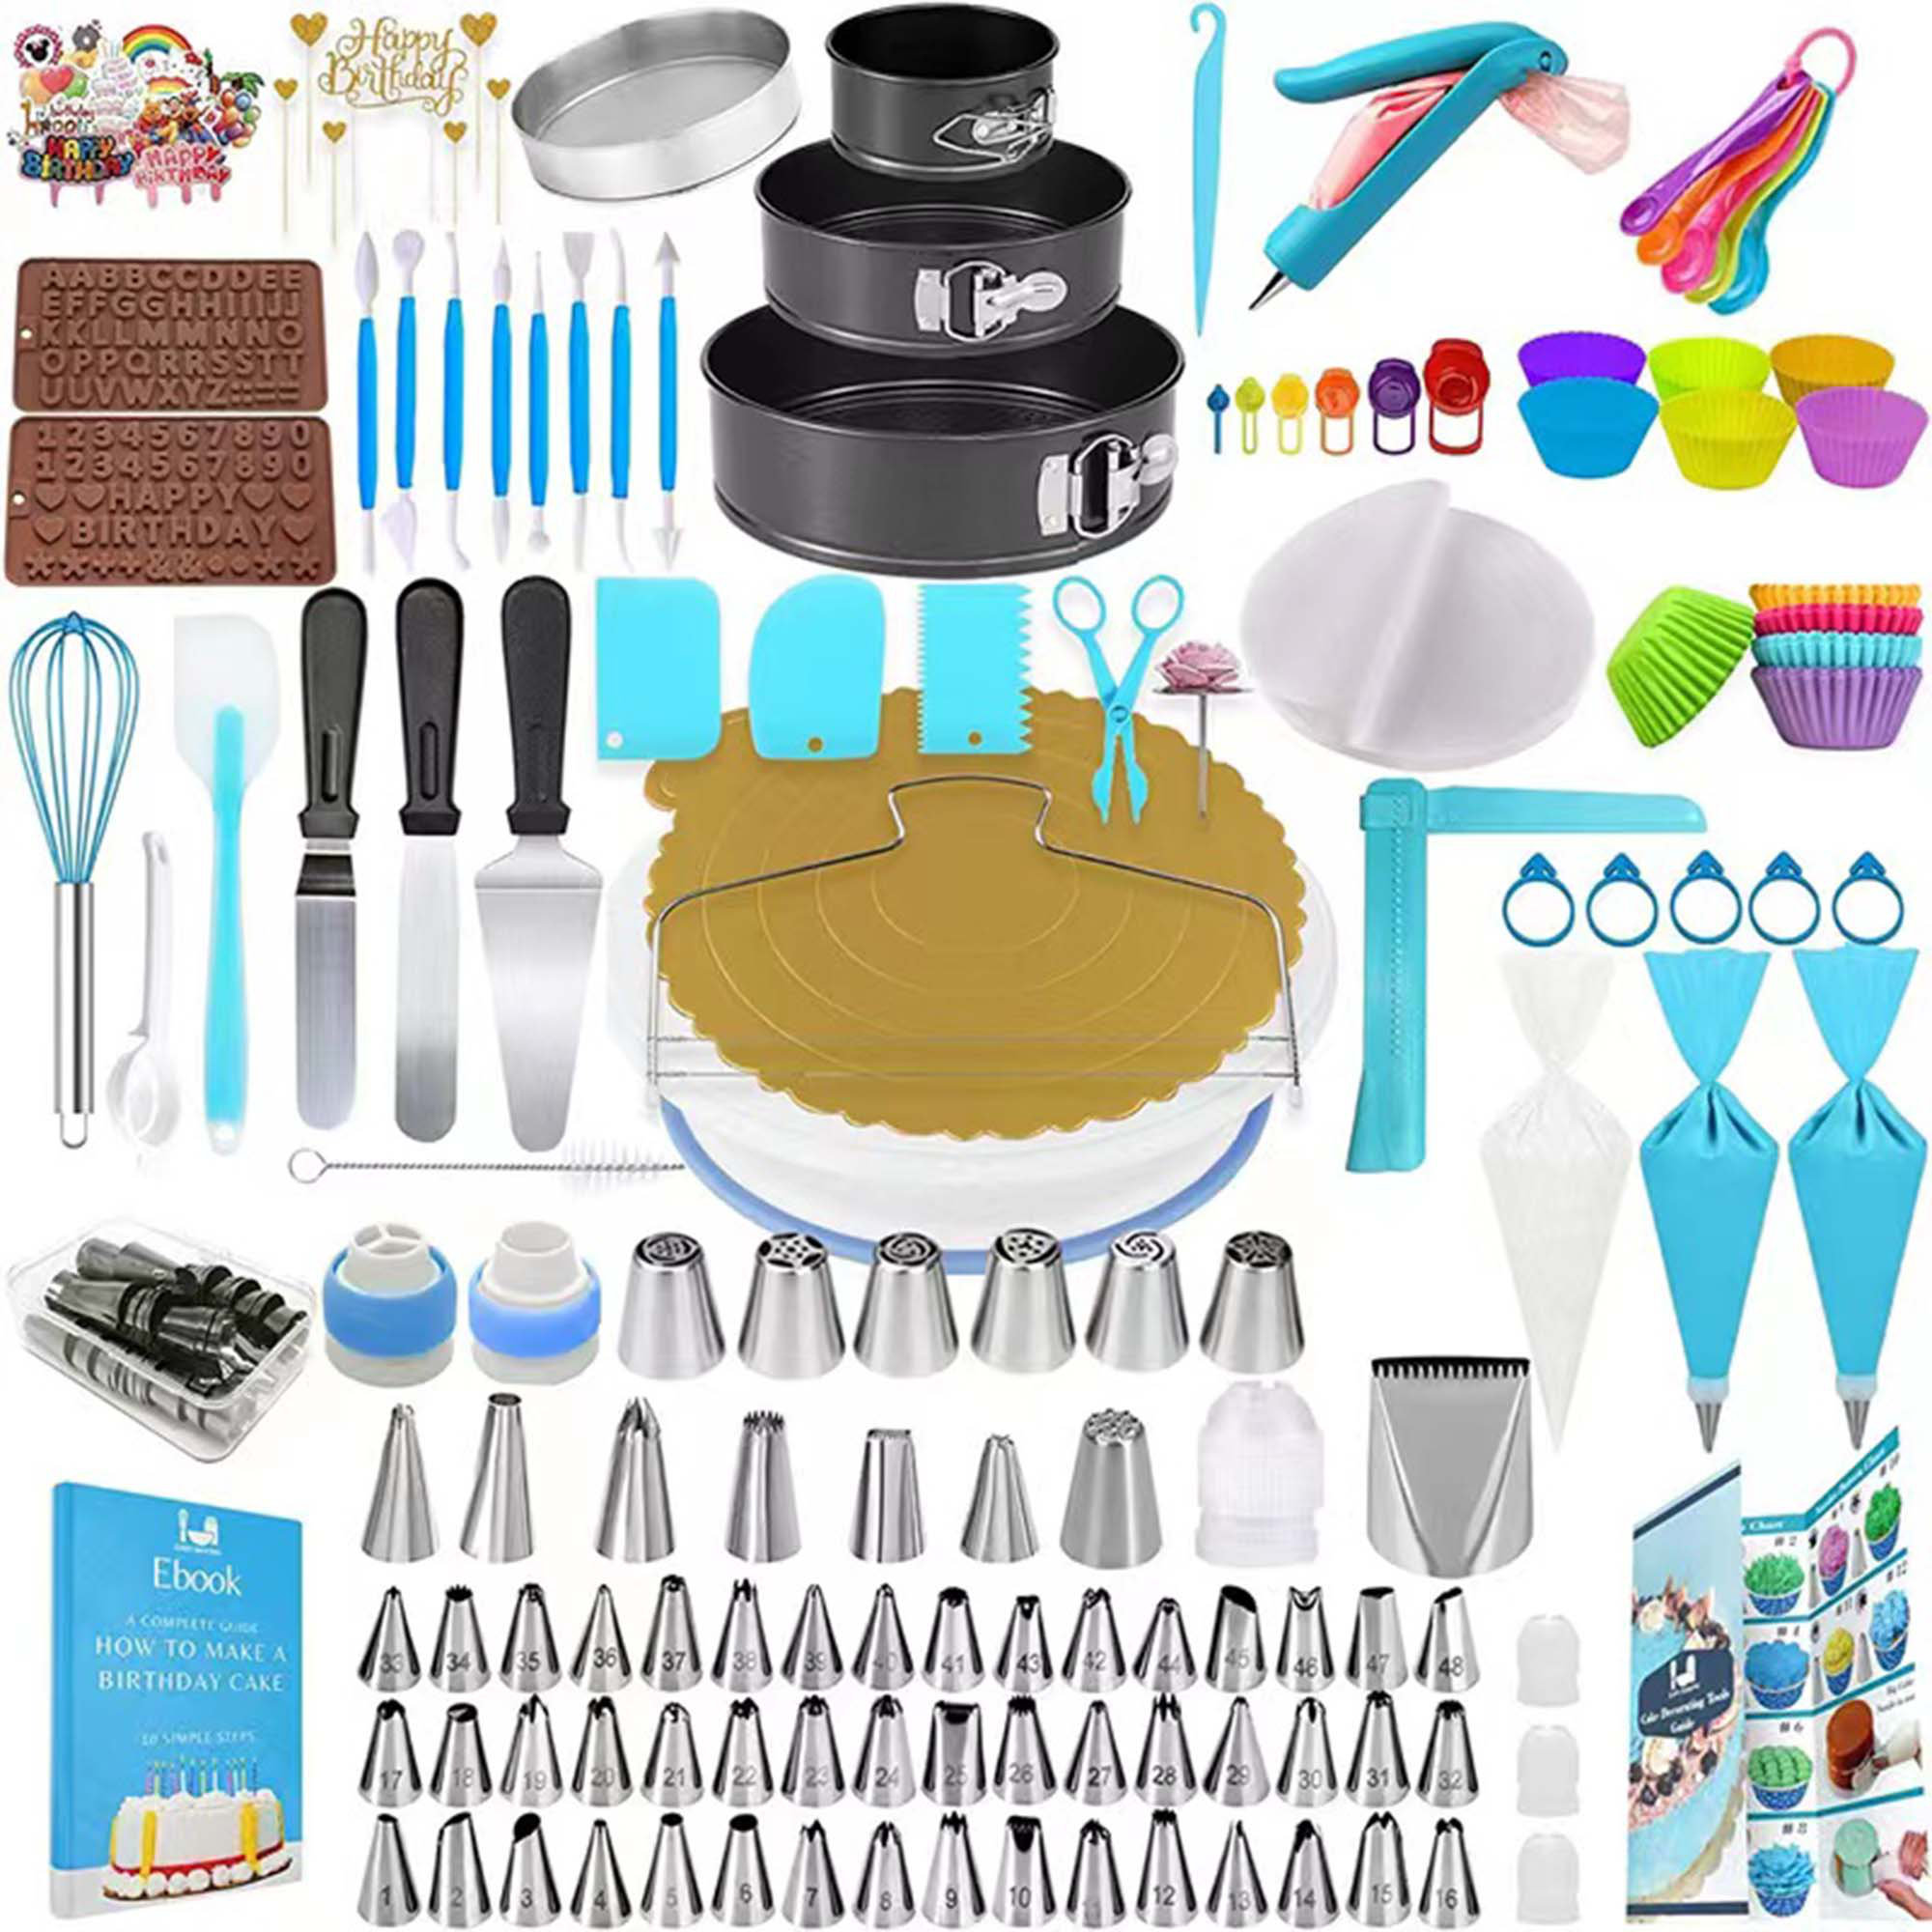 32 Pieces Cake Decorating Supplies, Gyvazla Cake Decorating Tip Set with 20  Stainless Icing Tips, 5 Large Piping Nozzles, 1 Grass Nozzle, 1 Puffs Tip,  2 Couplers, 1 Brush, 2 Silicone Pastry Bags price in UAE | Amazon UAE |  kanbkam